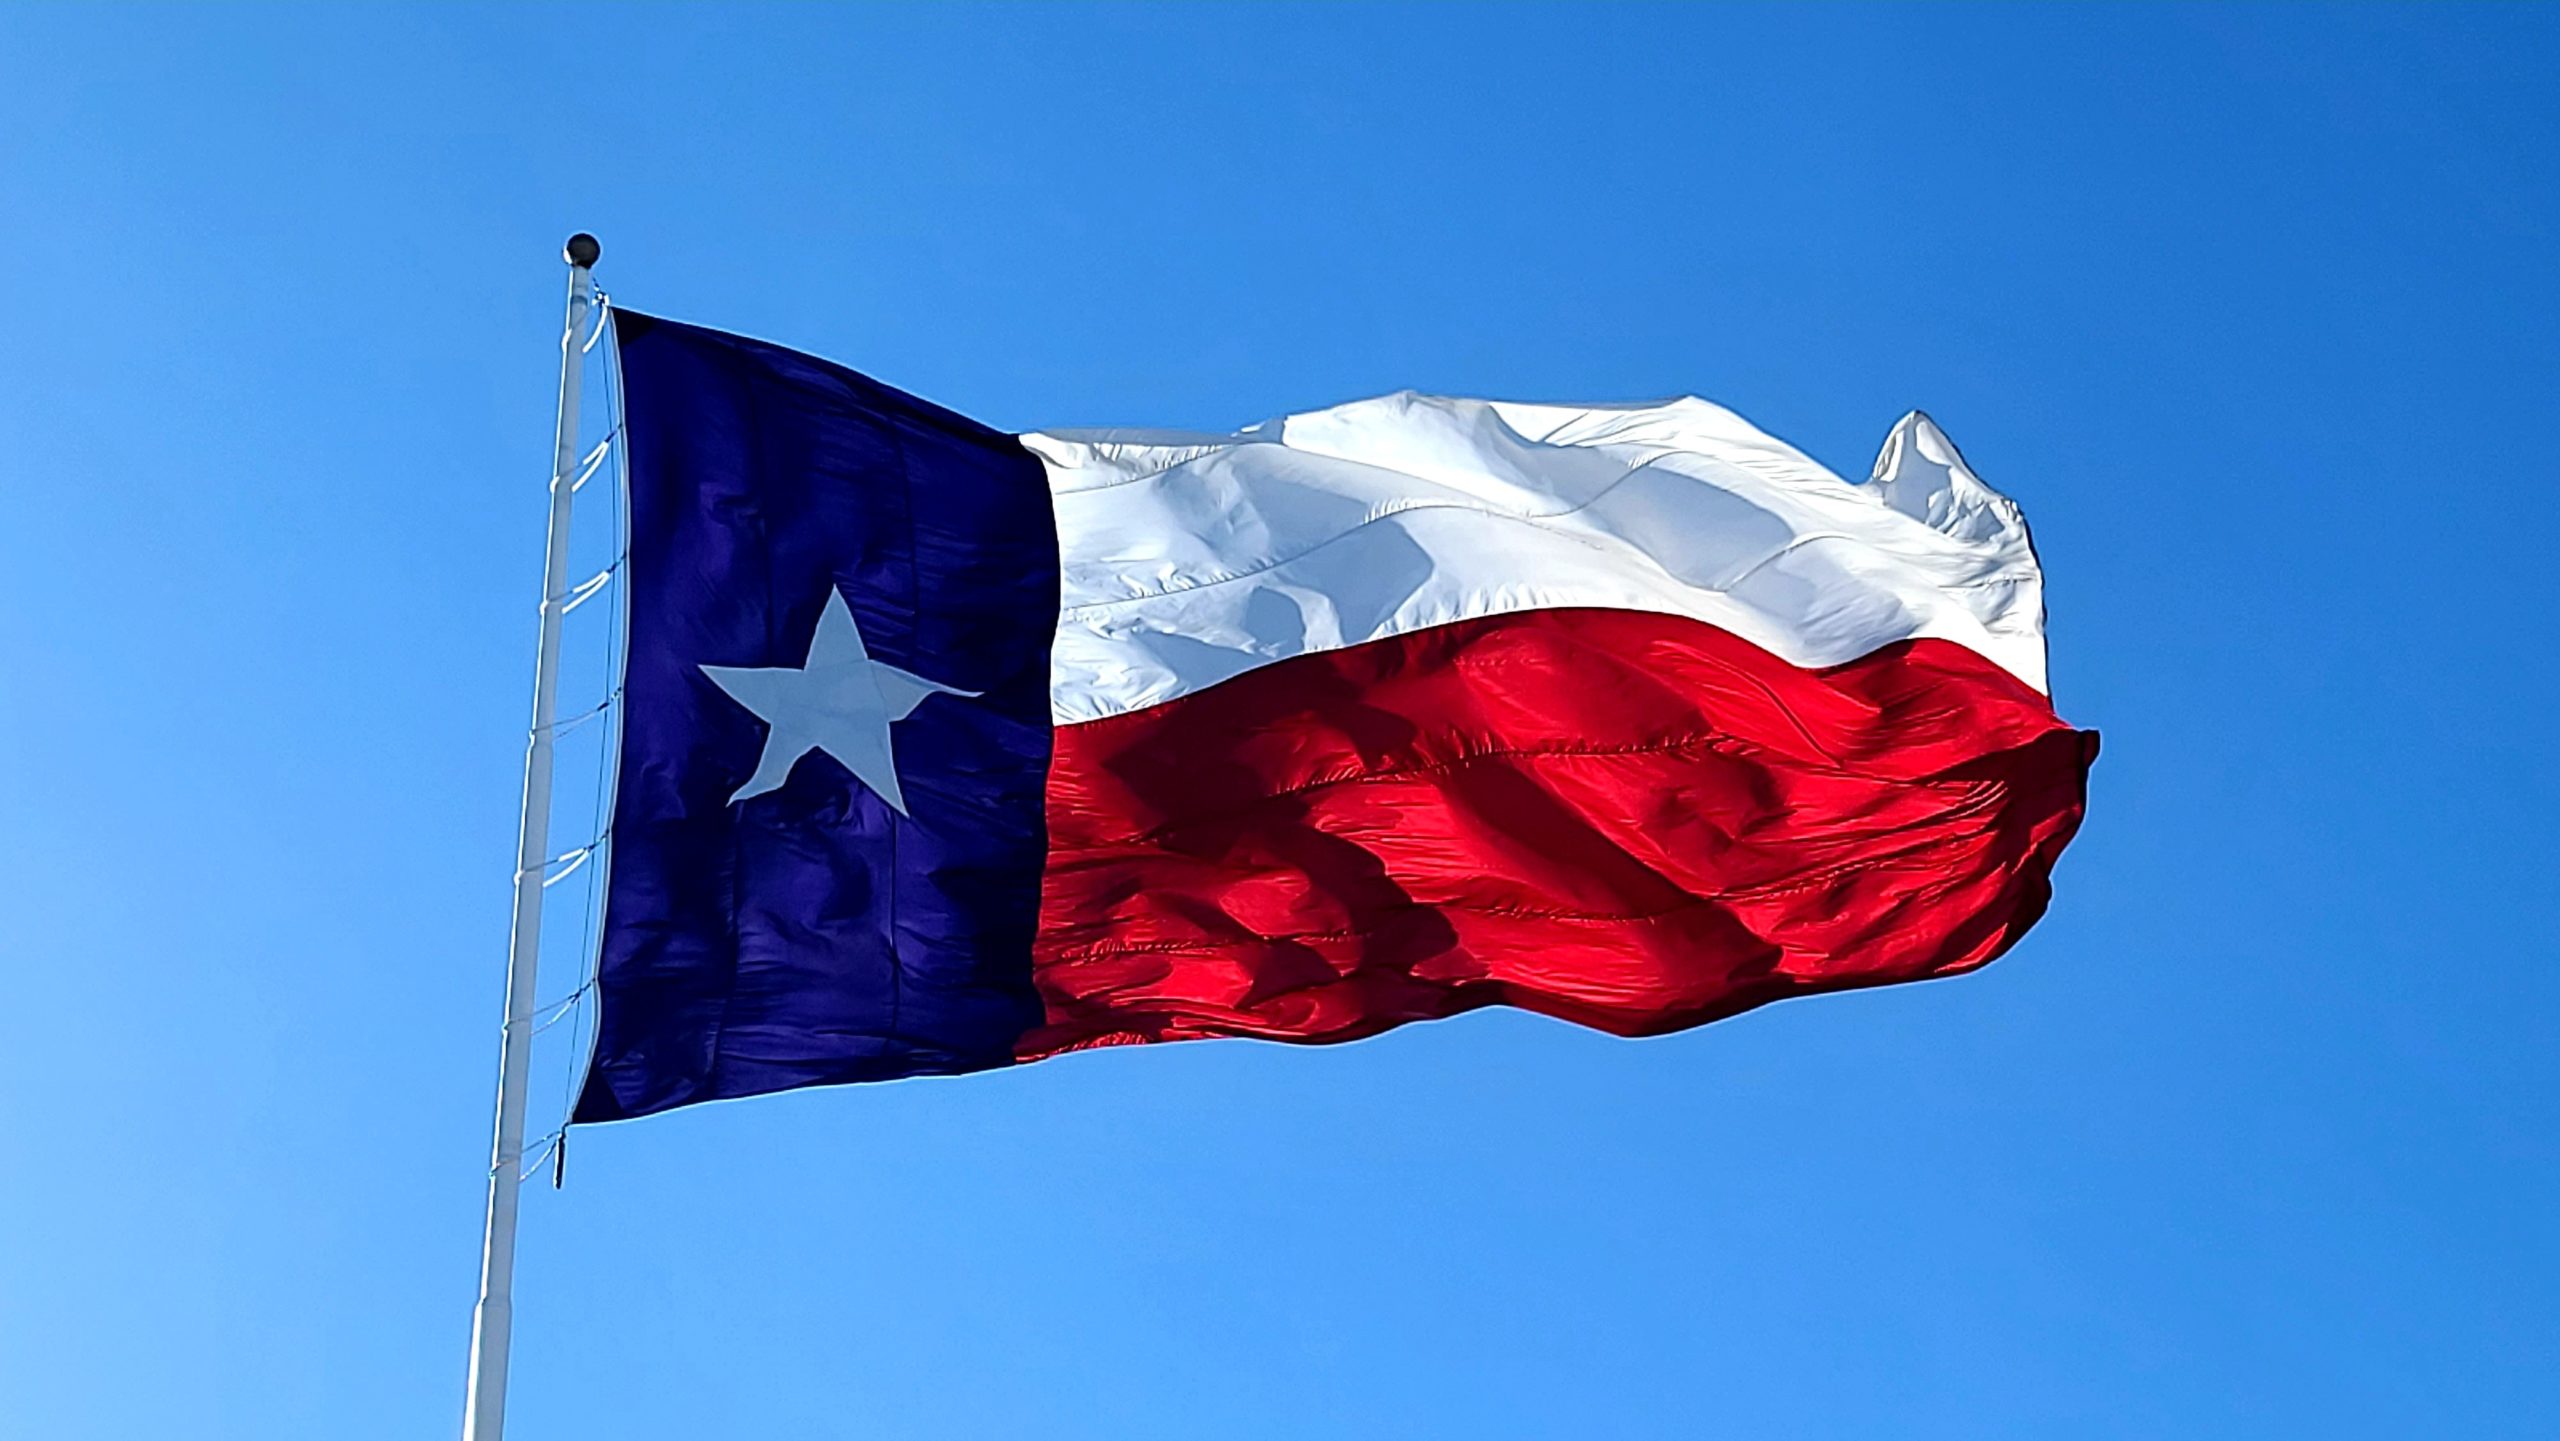 Two million Texans have their details exposed